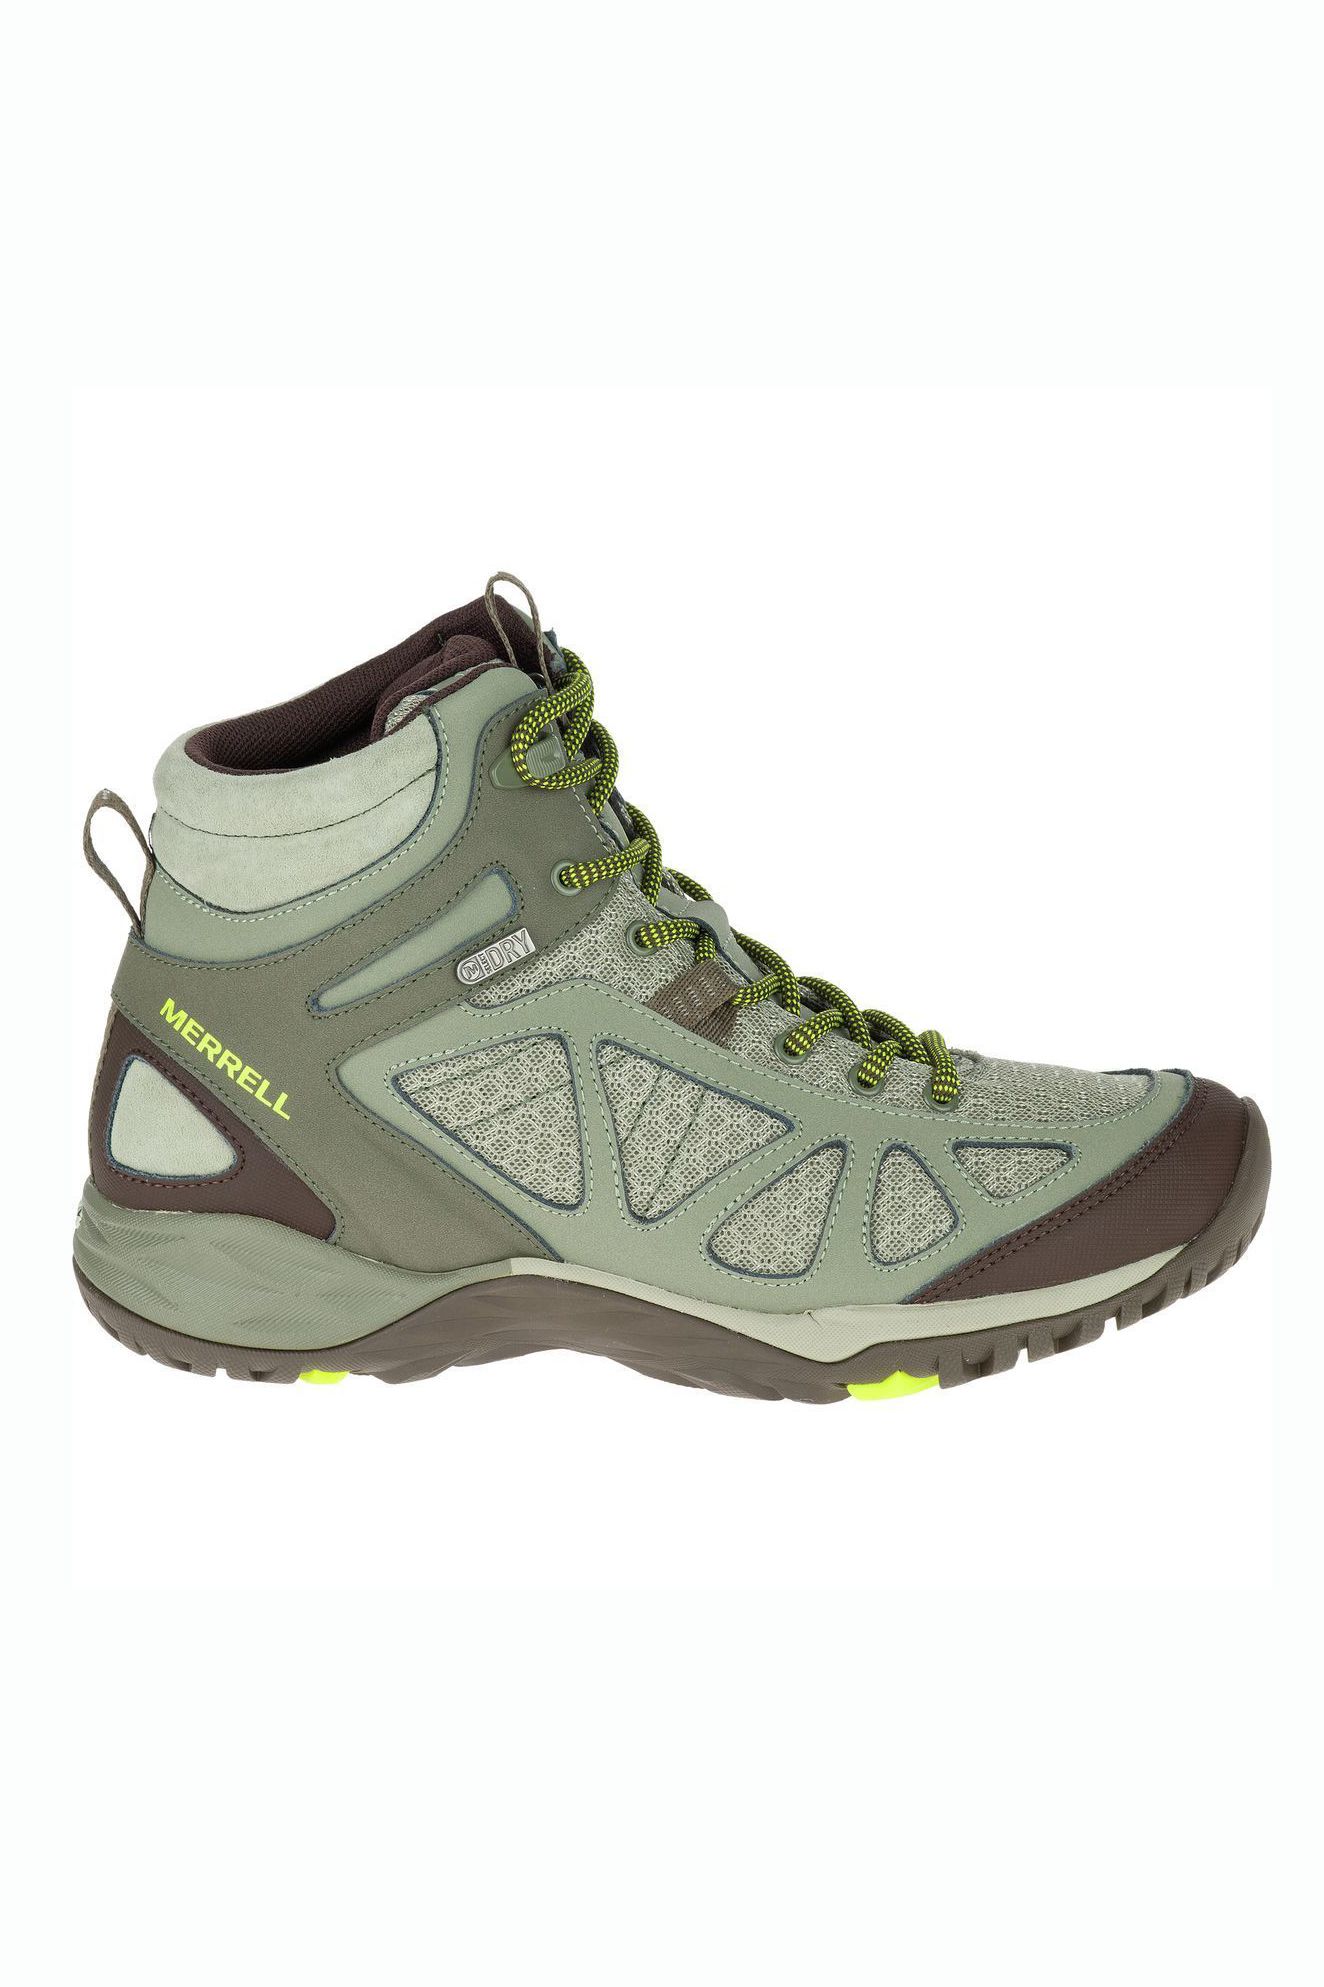 best hiking shoes for beginners